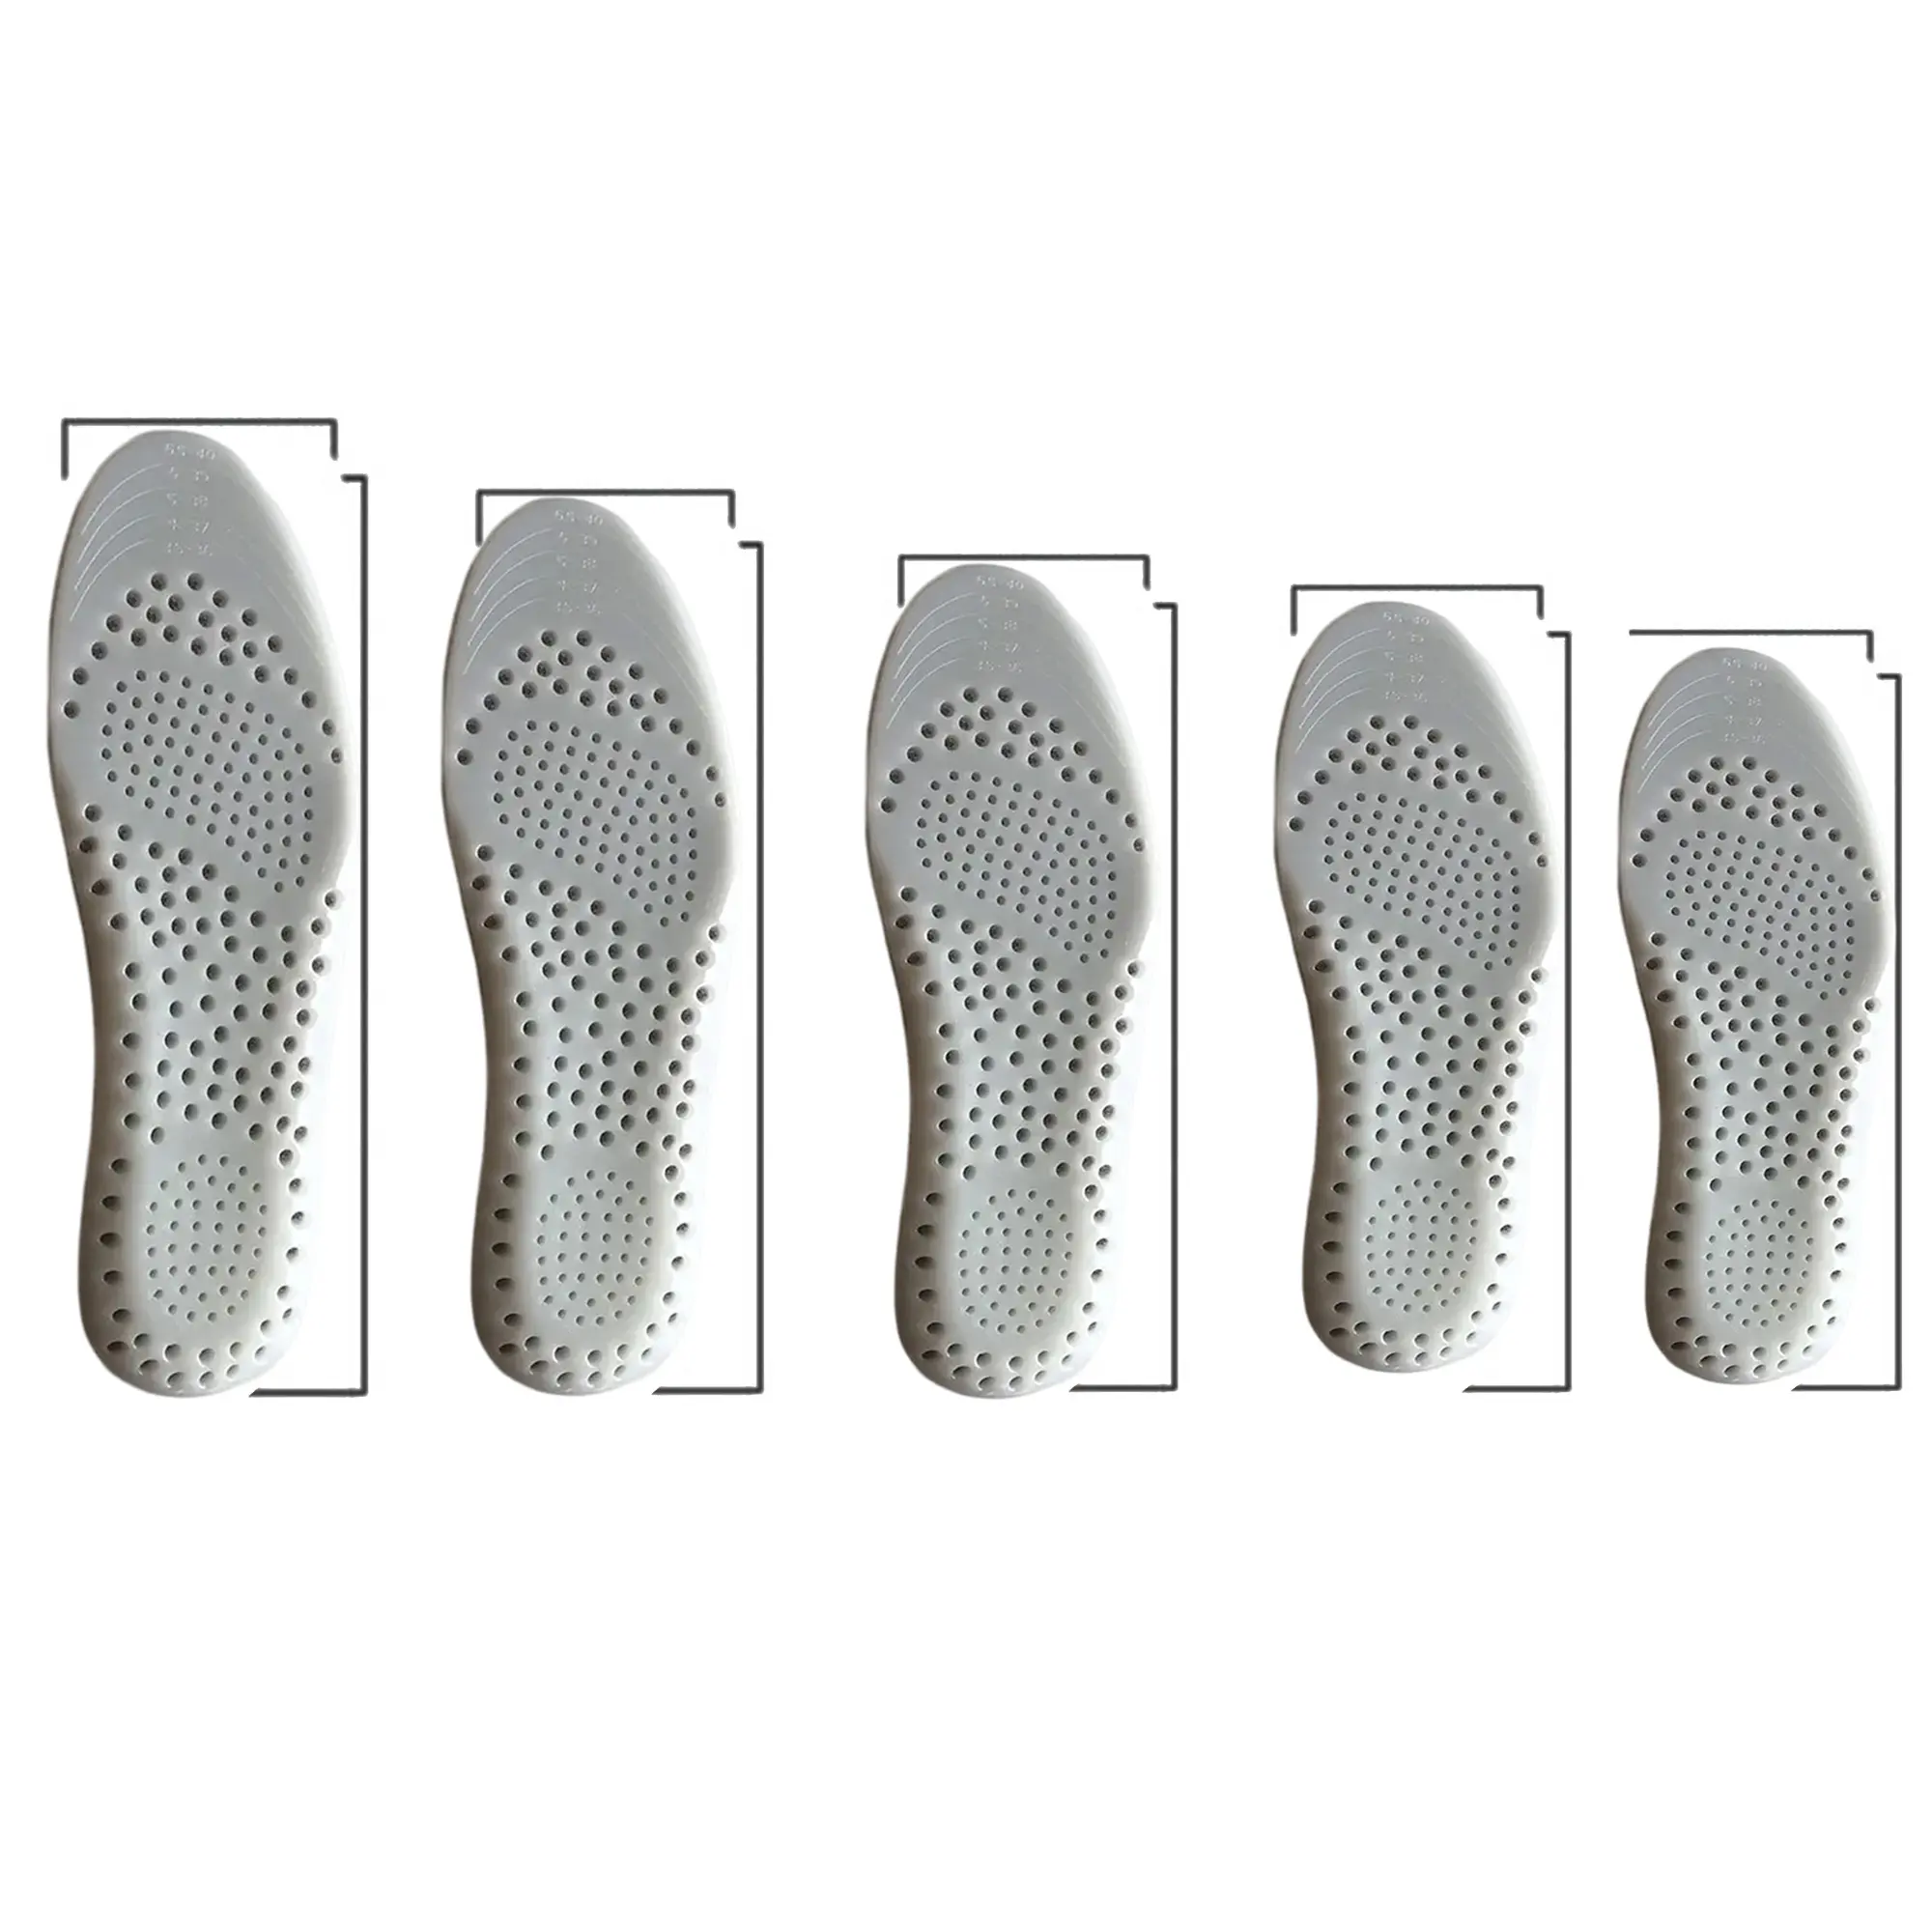 vktry performance orthopedic gel insoles arch support sport insoles for shoes